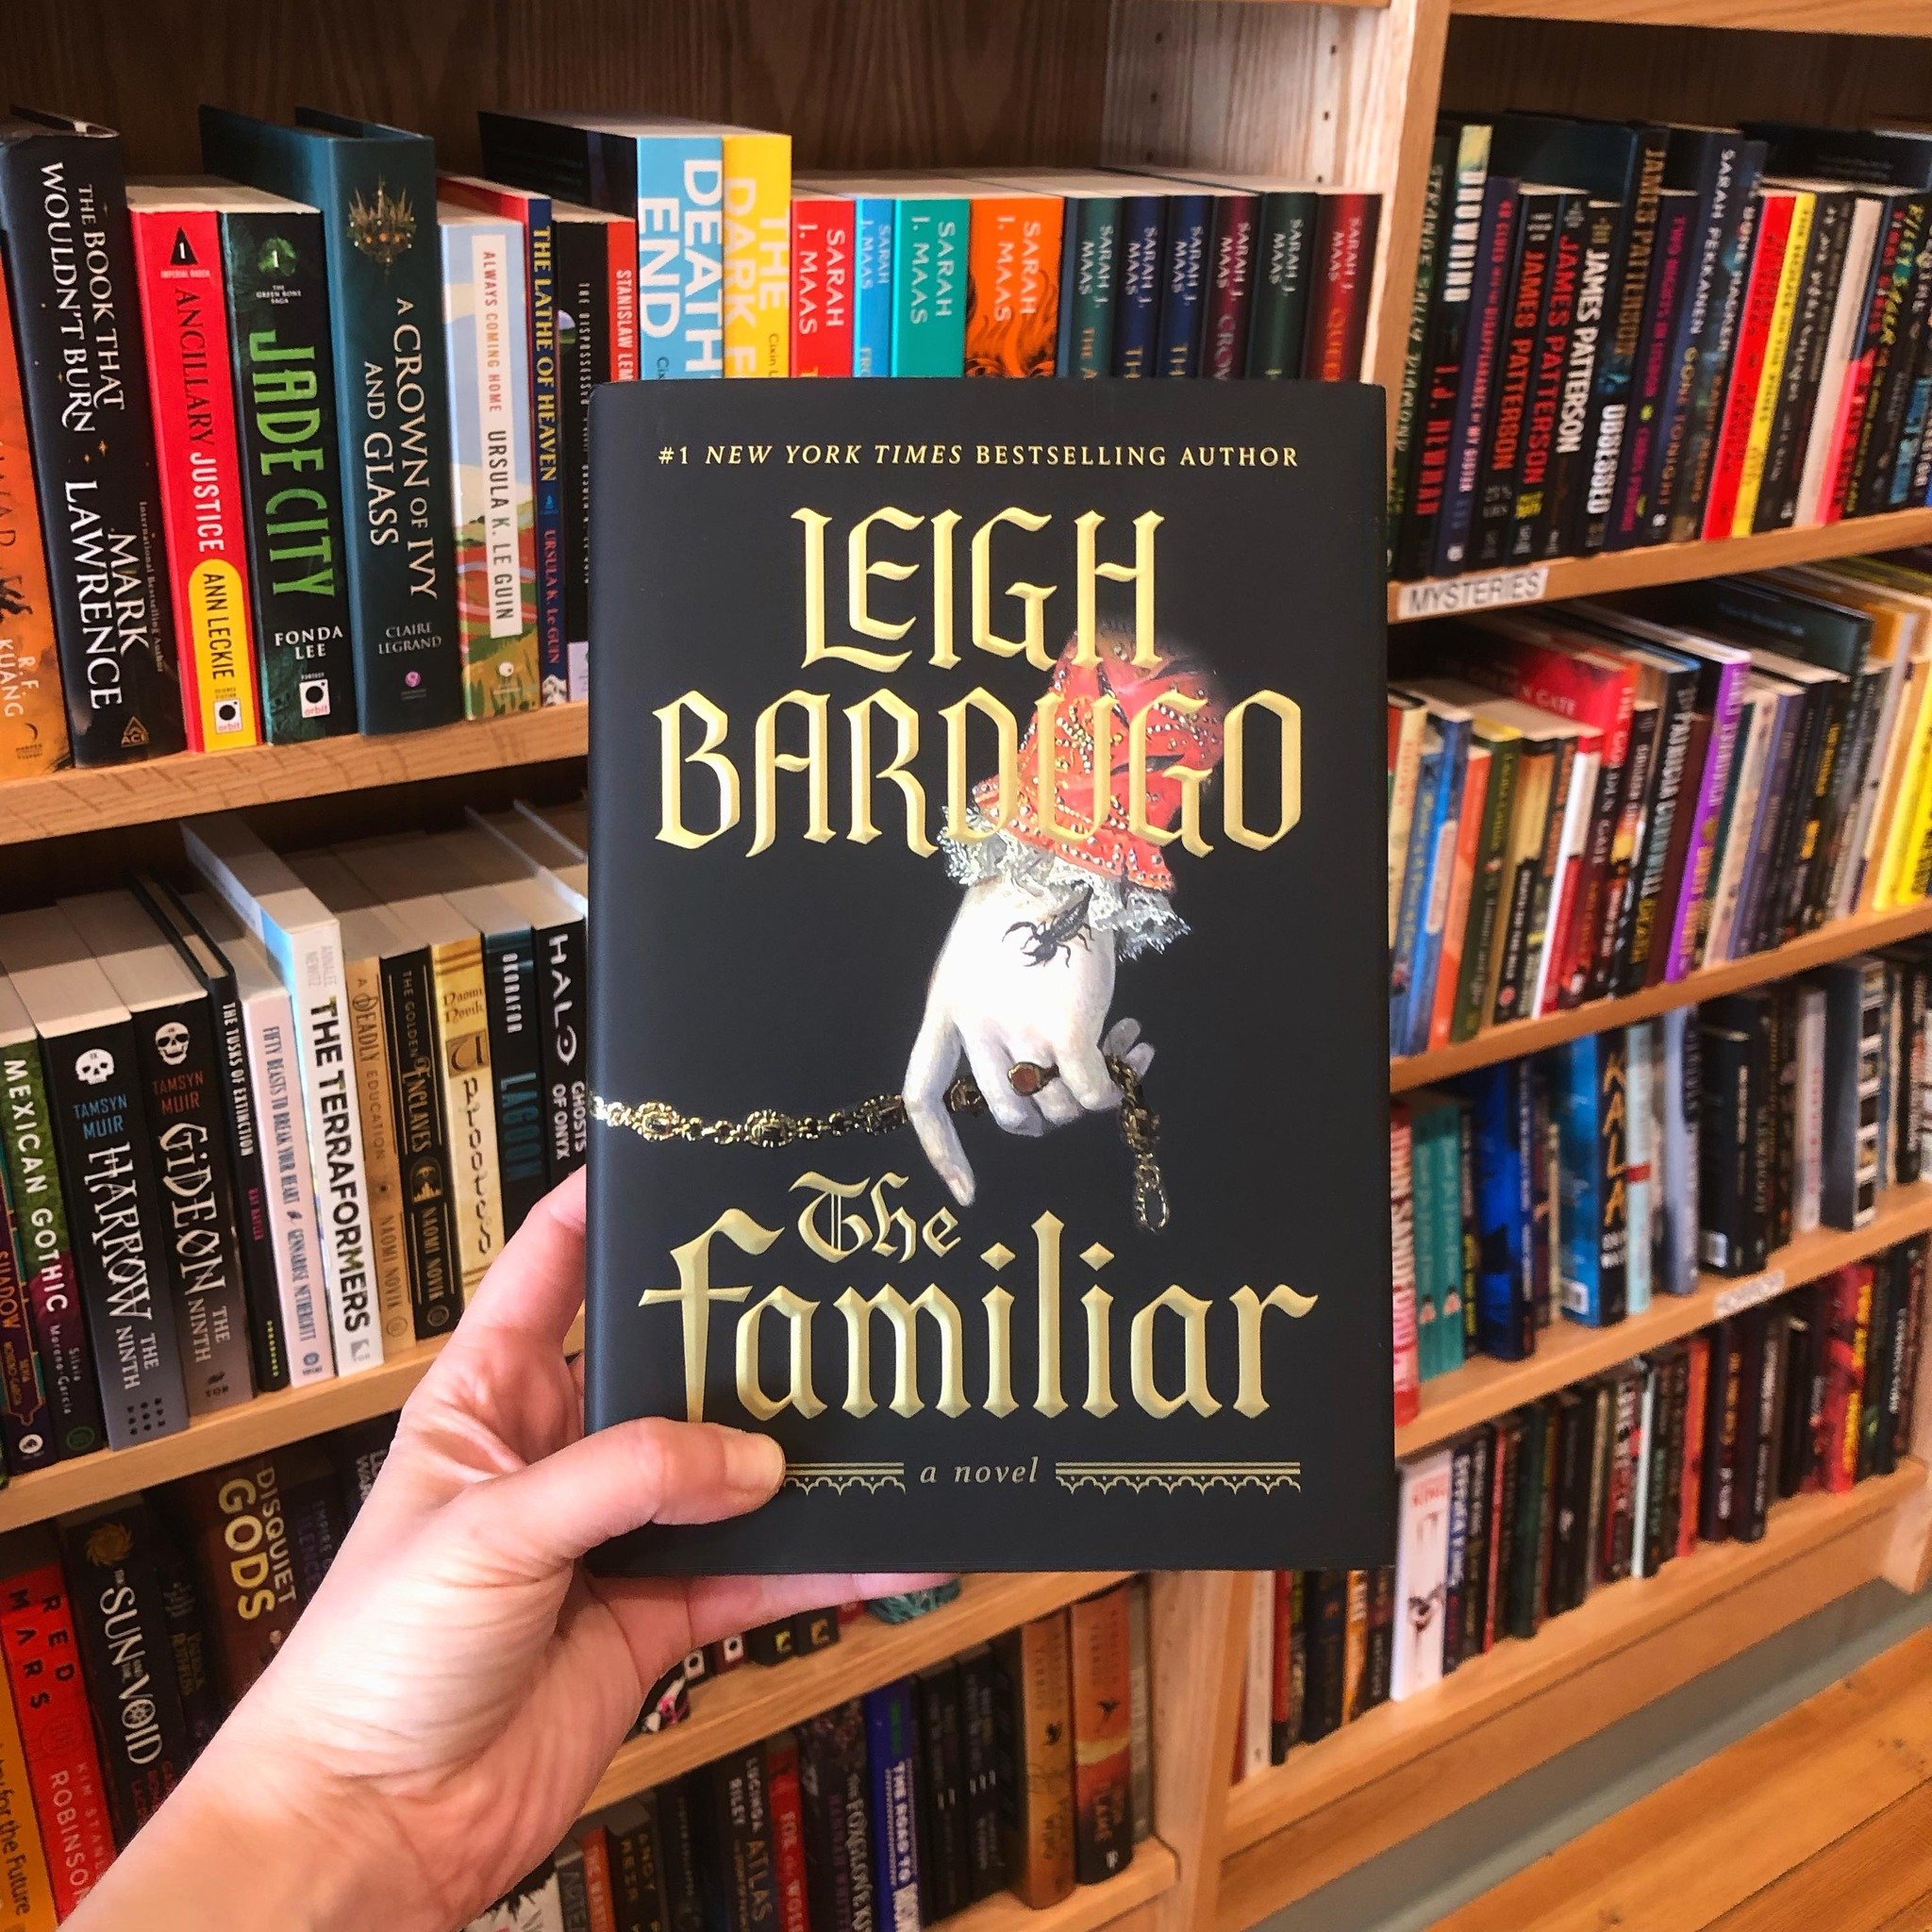 What&rsquo;s Hiding in the Stacks? 🤓

The Familiar is a new standalone #fantasy novel from Leigh Bardugo (author of #NinthHouse, the #ShadowandBone series and more). This suspenseful and well-paced narrative is full of magic and romance and sure to 